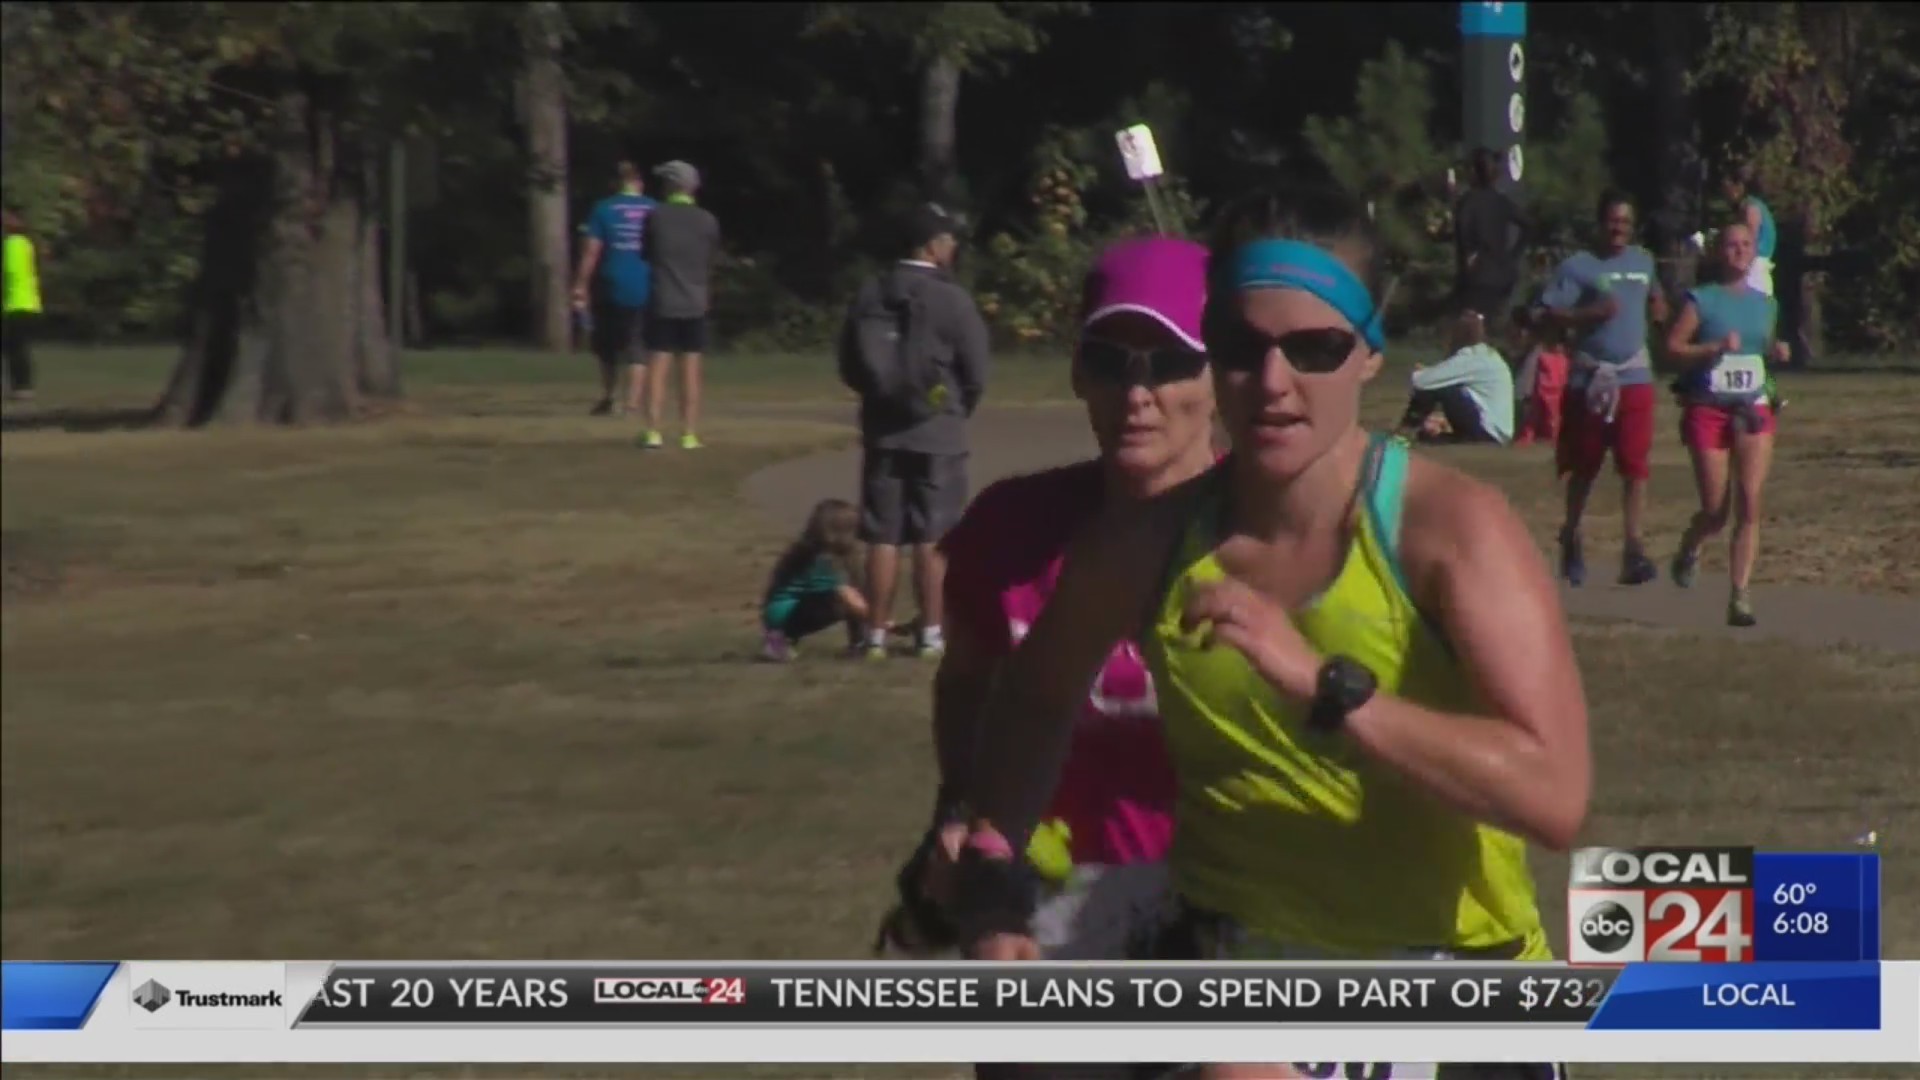 IRONMAN event coming to Memphis area next year